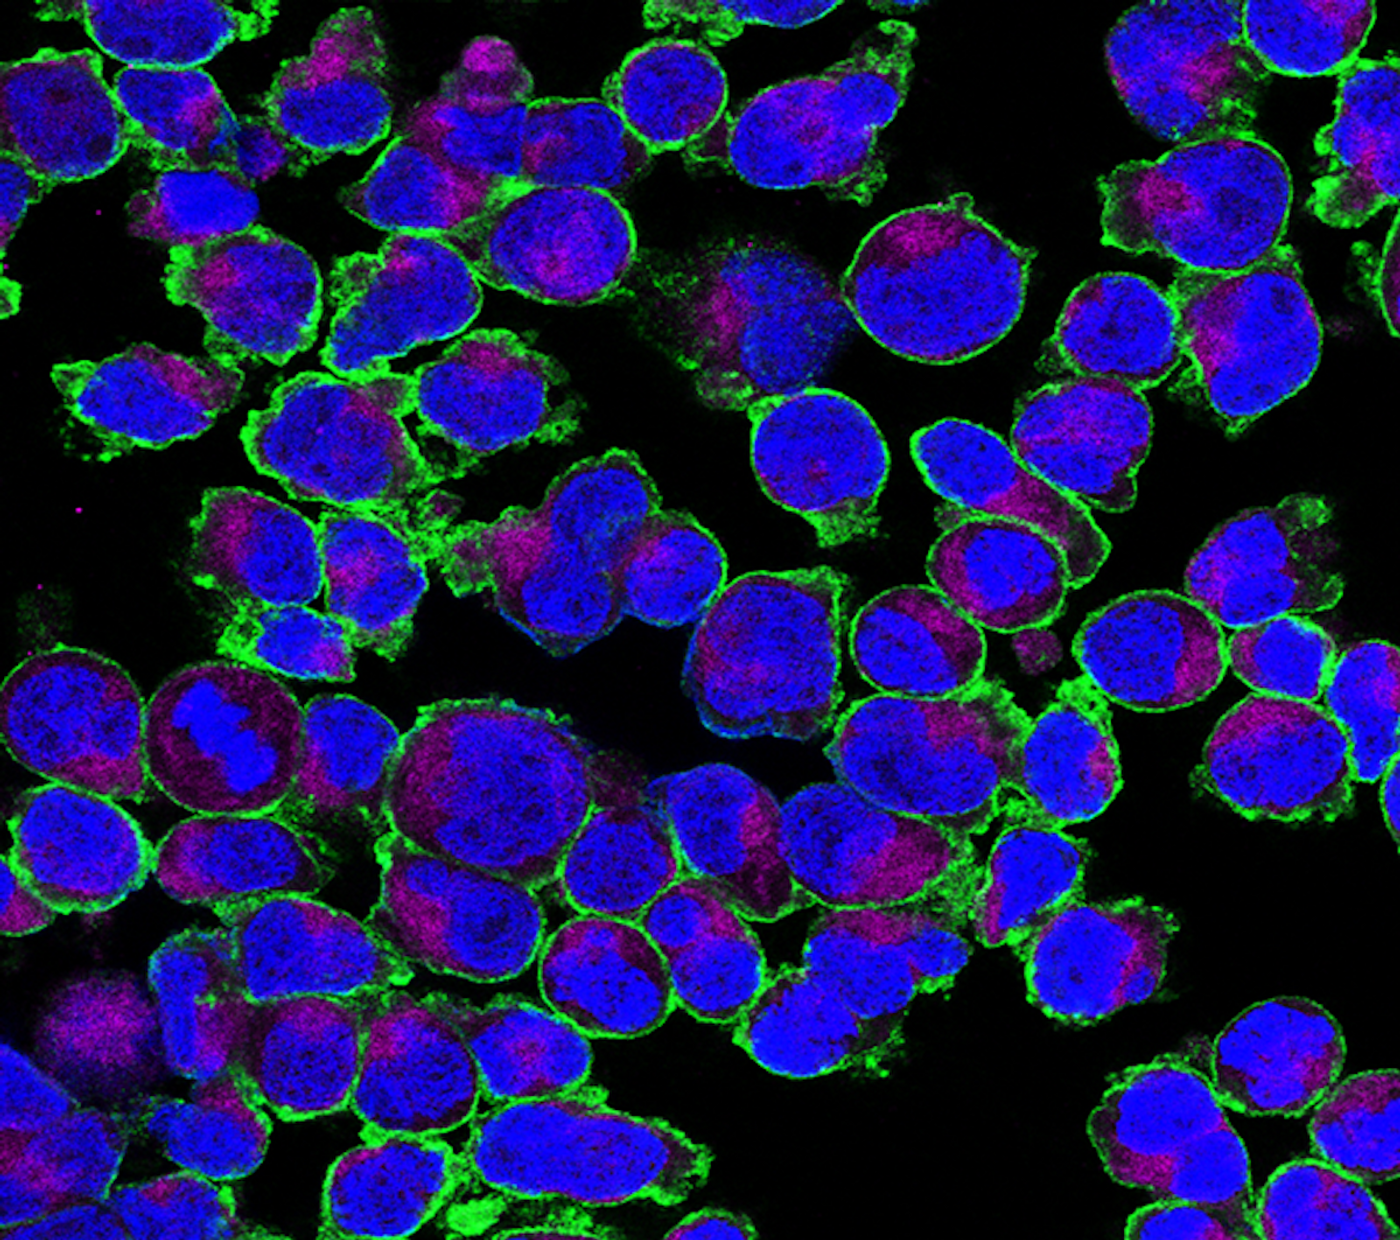 GLUT3 (green) on the surface of activated T cells, with mitochondria (violet) and the nucleus (blue). Photo: AG Väth